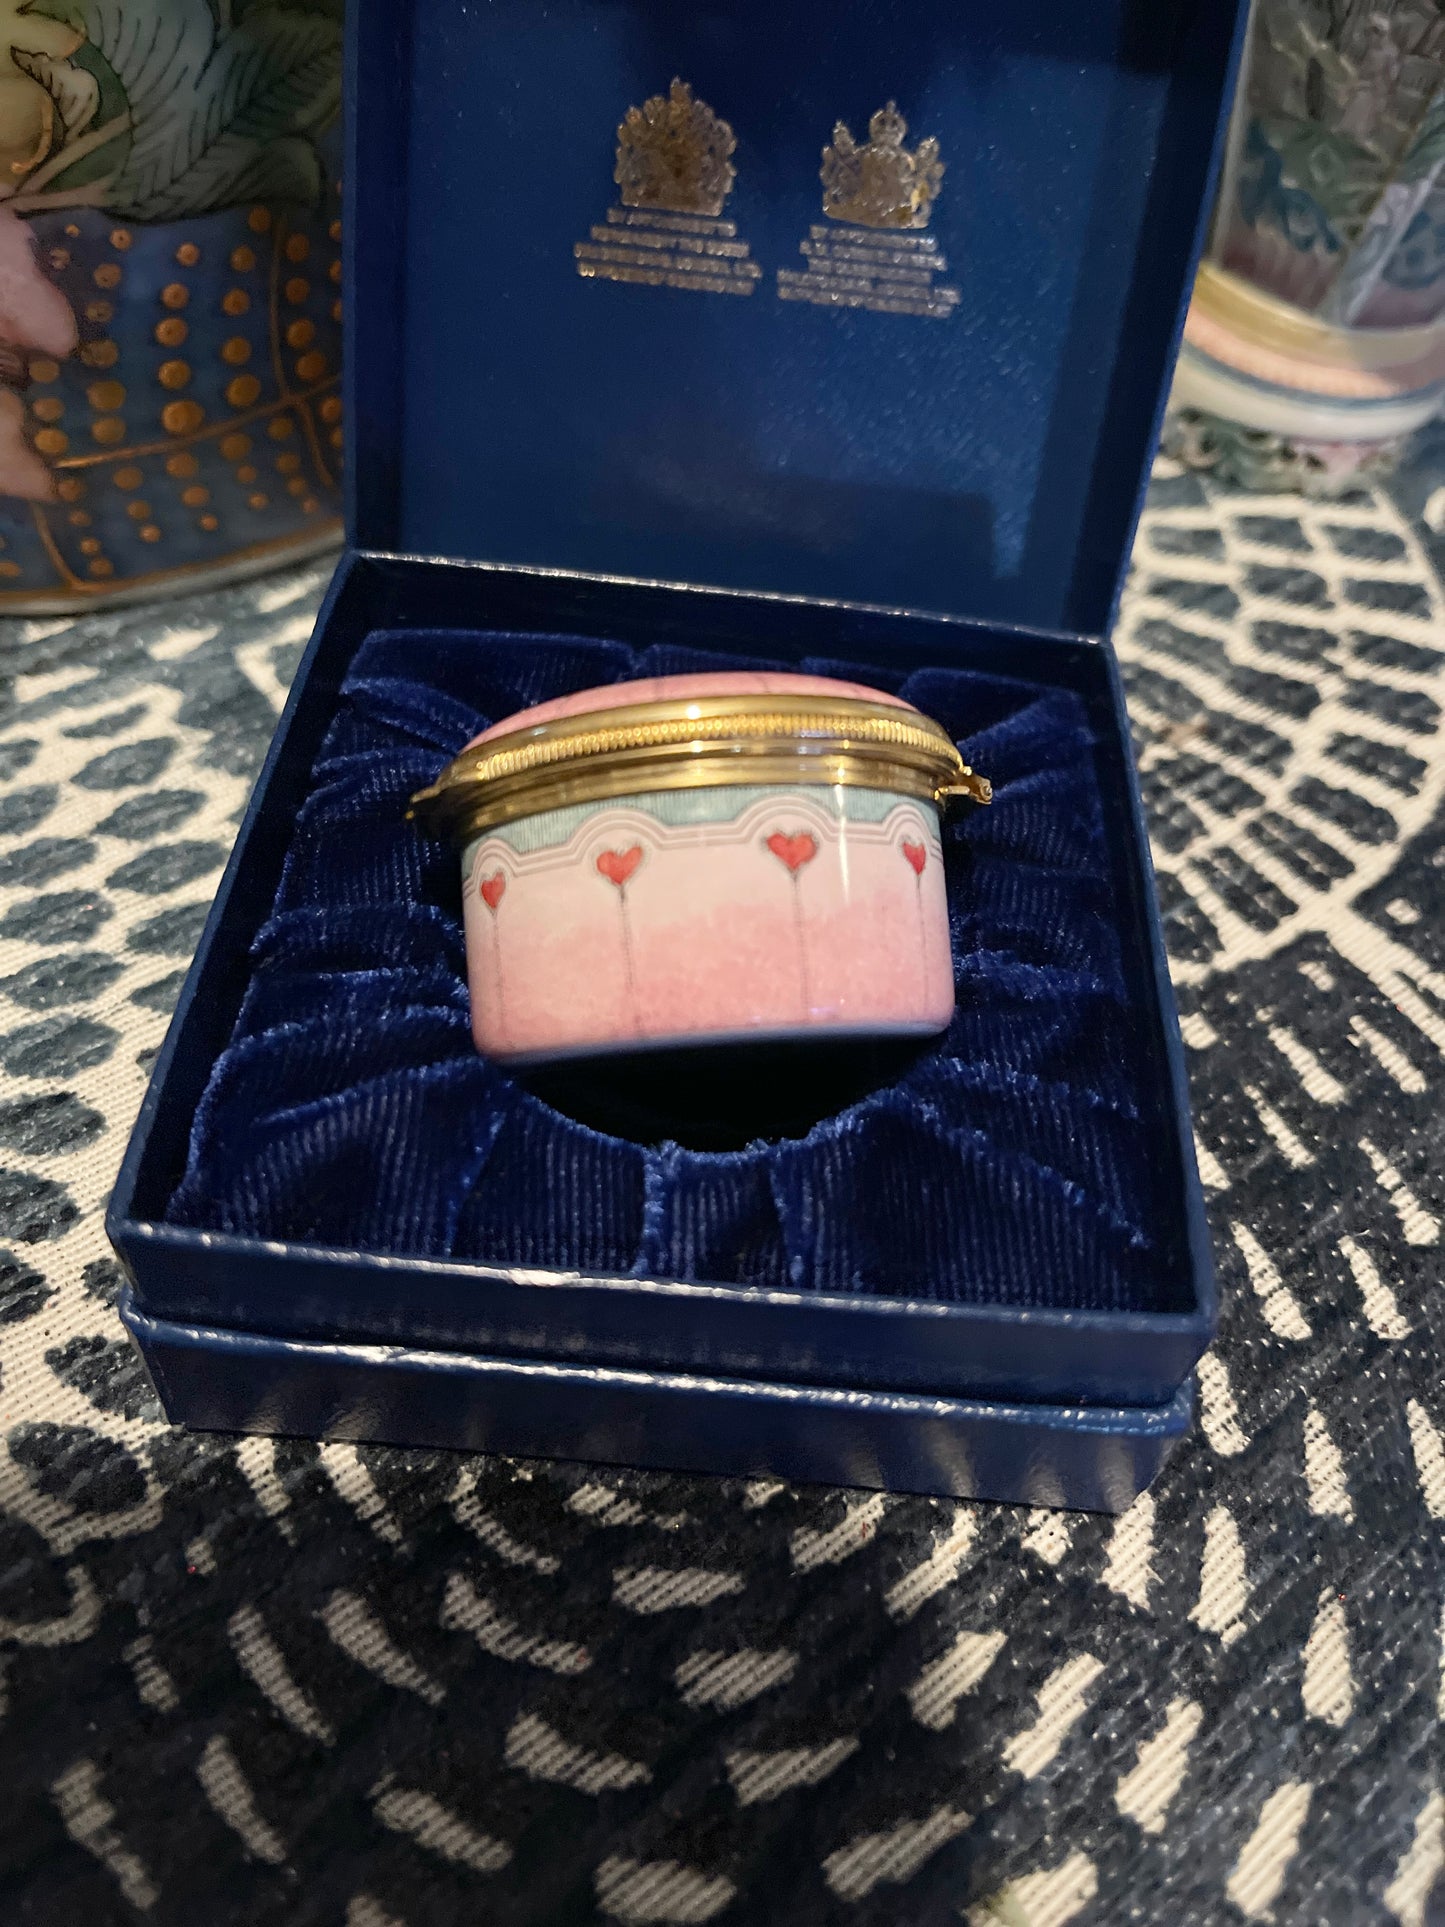 Halcyon Days Pink Enamel Box, Love Betters What is Best, Williams Wordsworth , Heart Detail